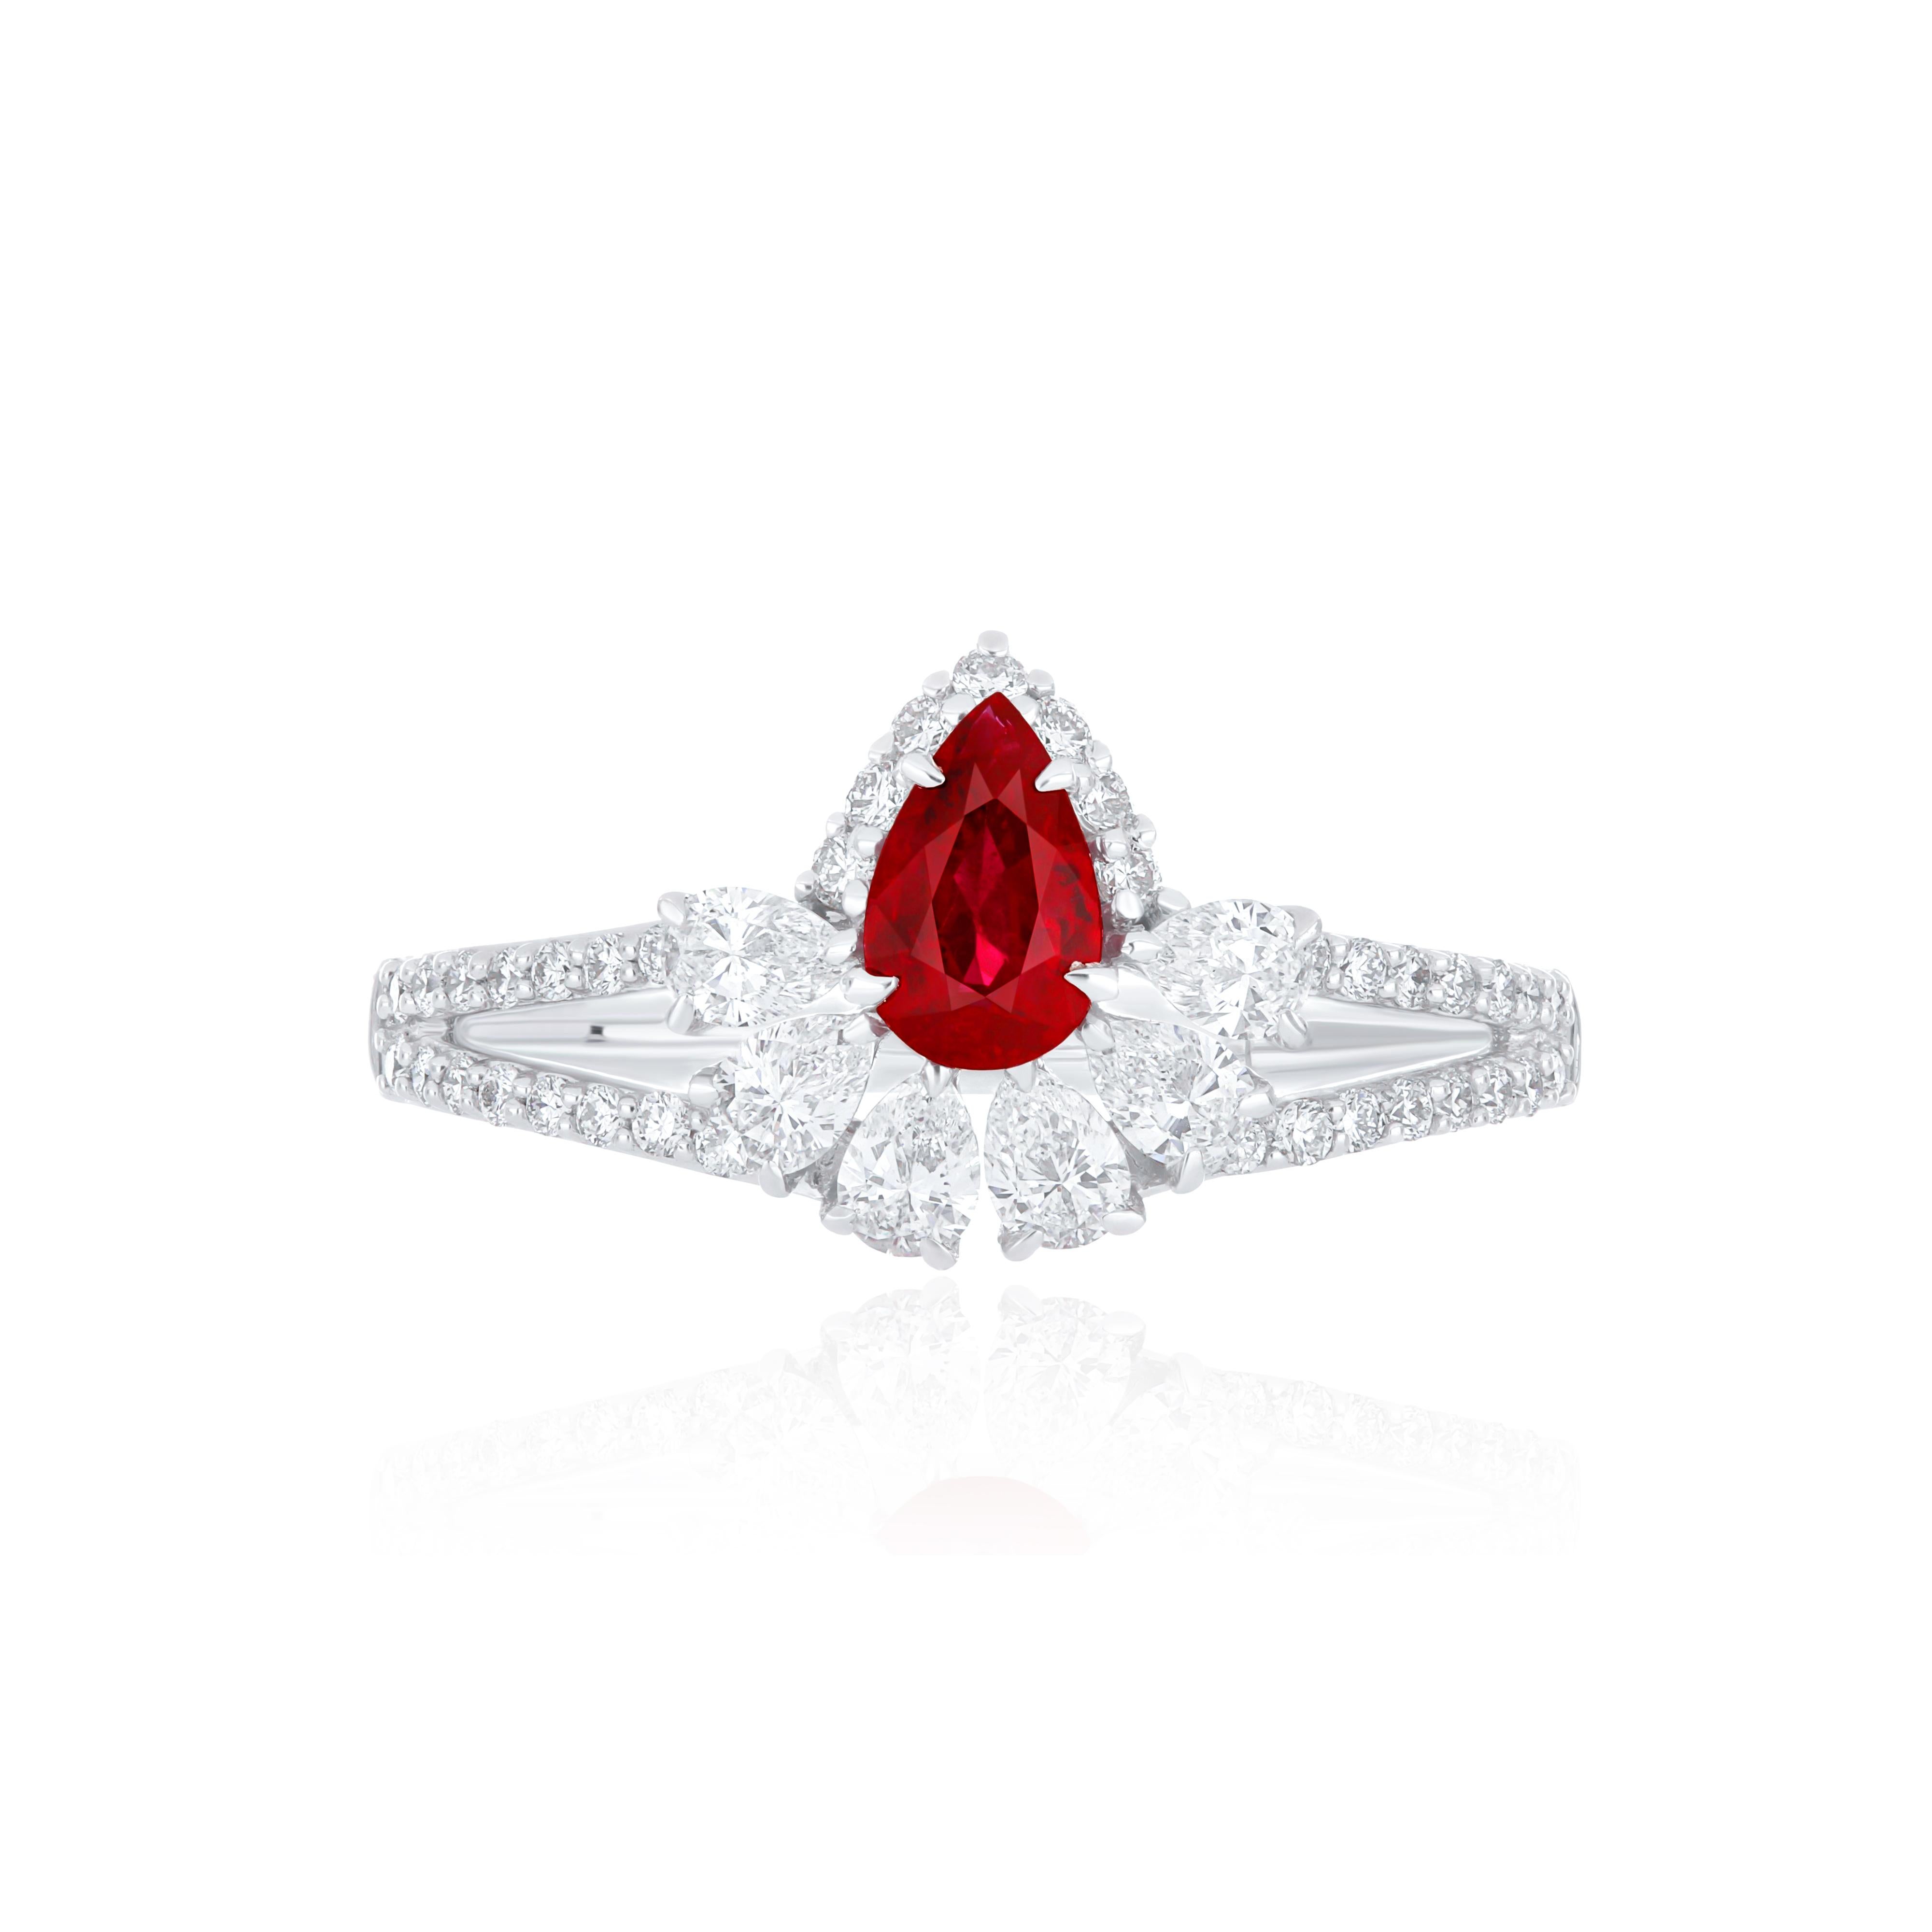 Elegant and exquisitely detailed 18 Karat White Gold Ring, center set with 0.40 CT's. Pear Shape Ruby Mozambique and micro pave set Diamonds, weighing approx. 0.63 CT's Beautifully Hand crafted in 18 Karat White Gold.

Stone Detail:
Ruby Mozambique: